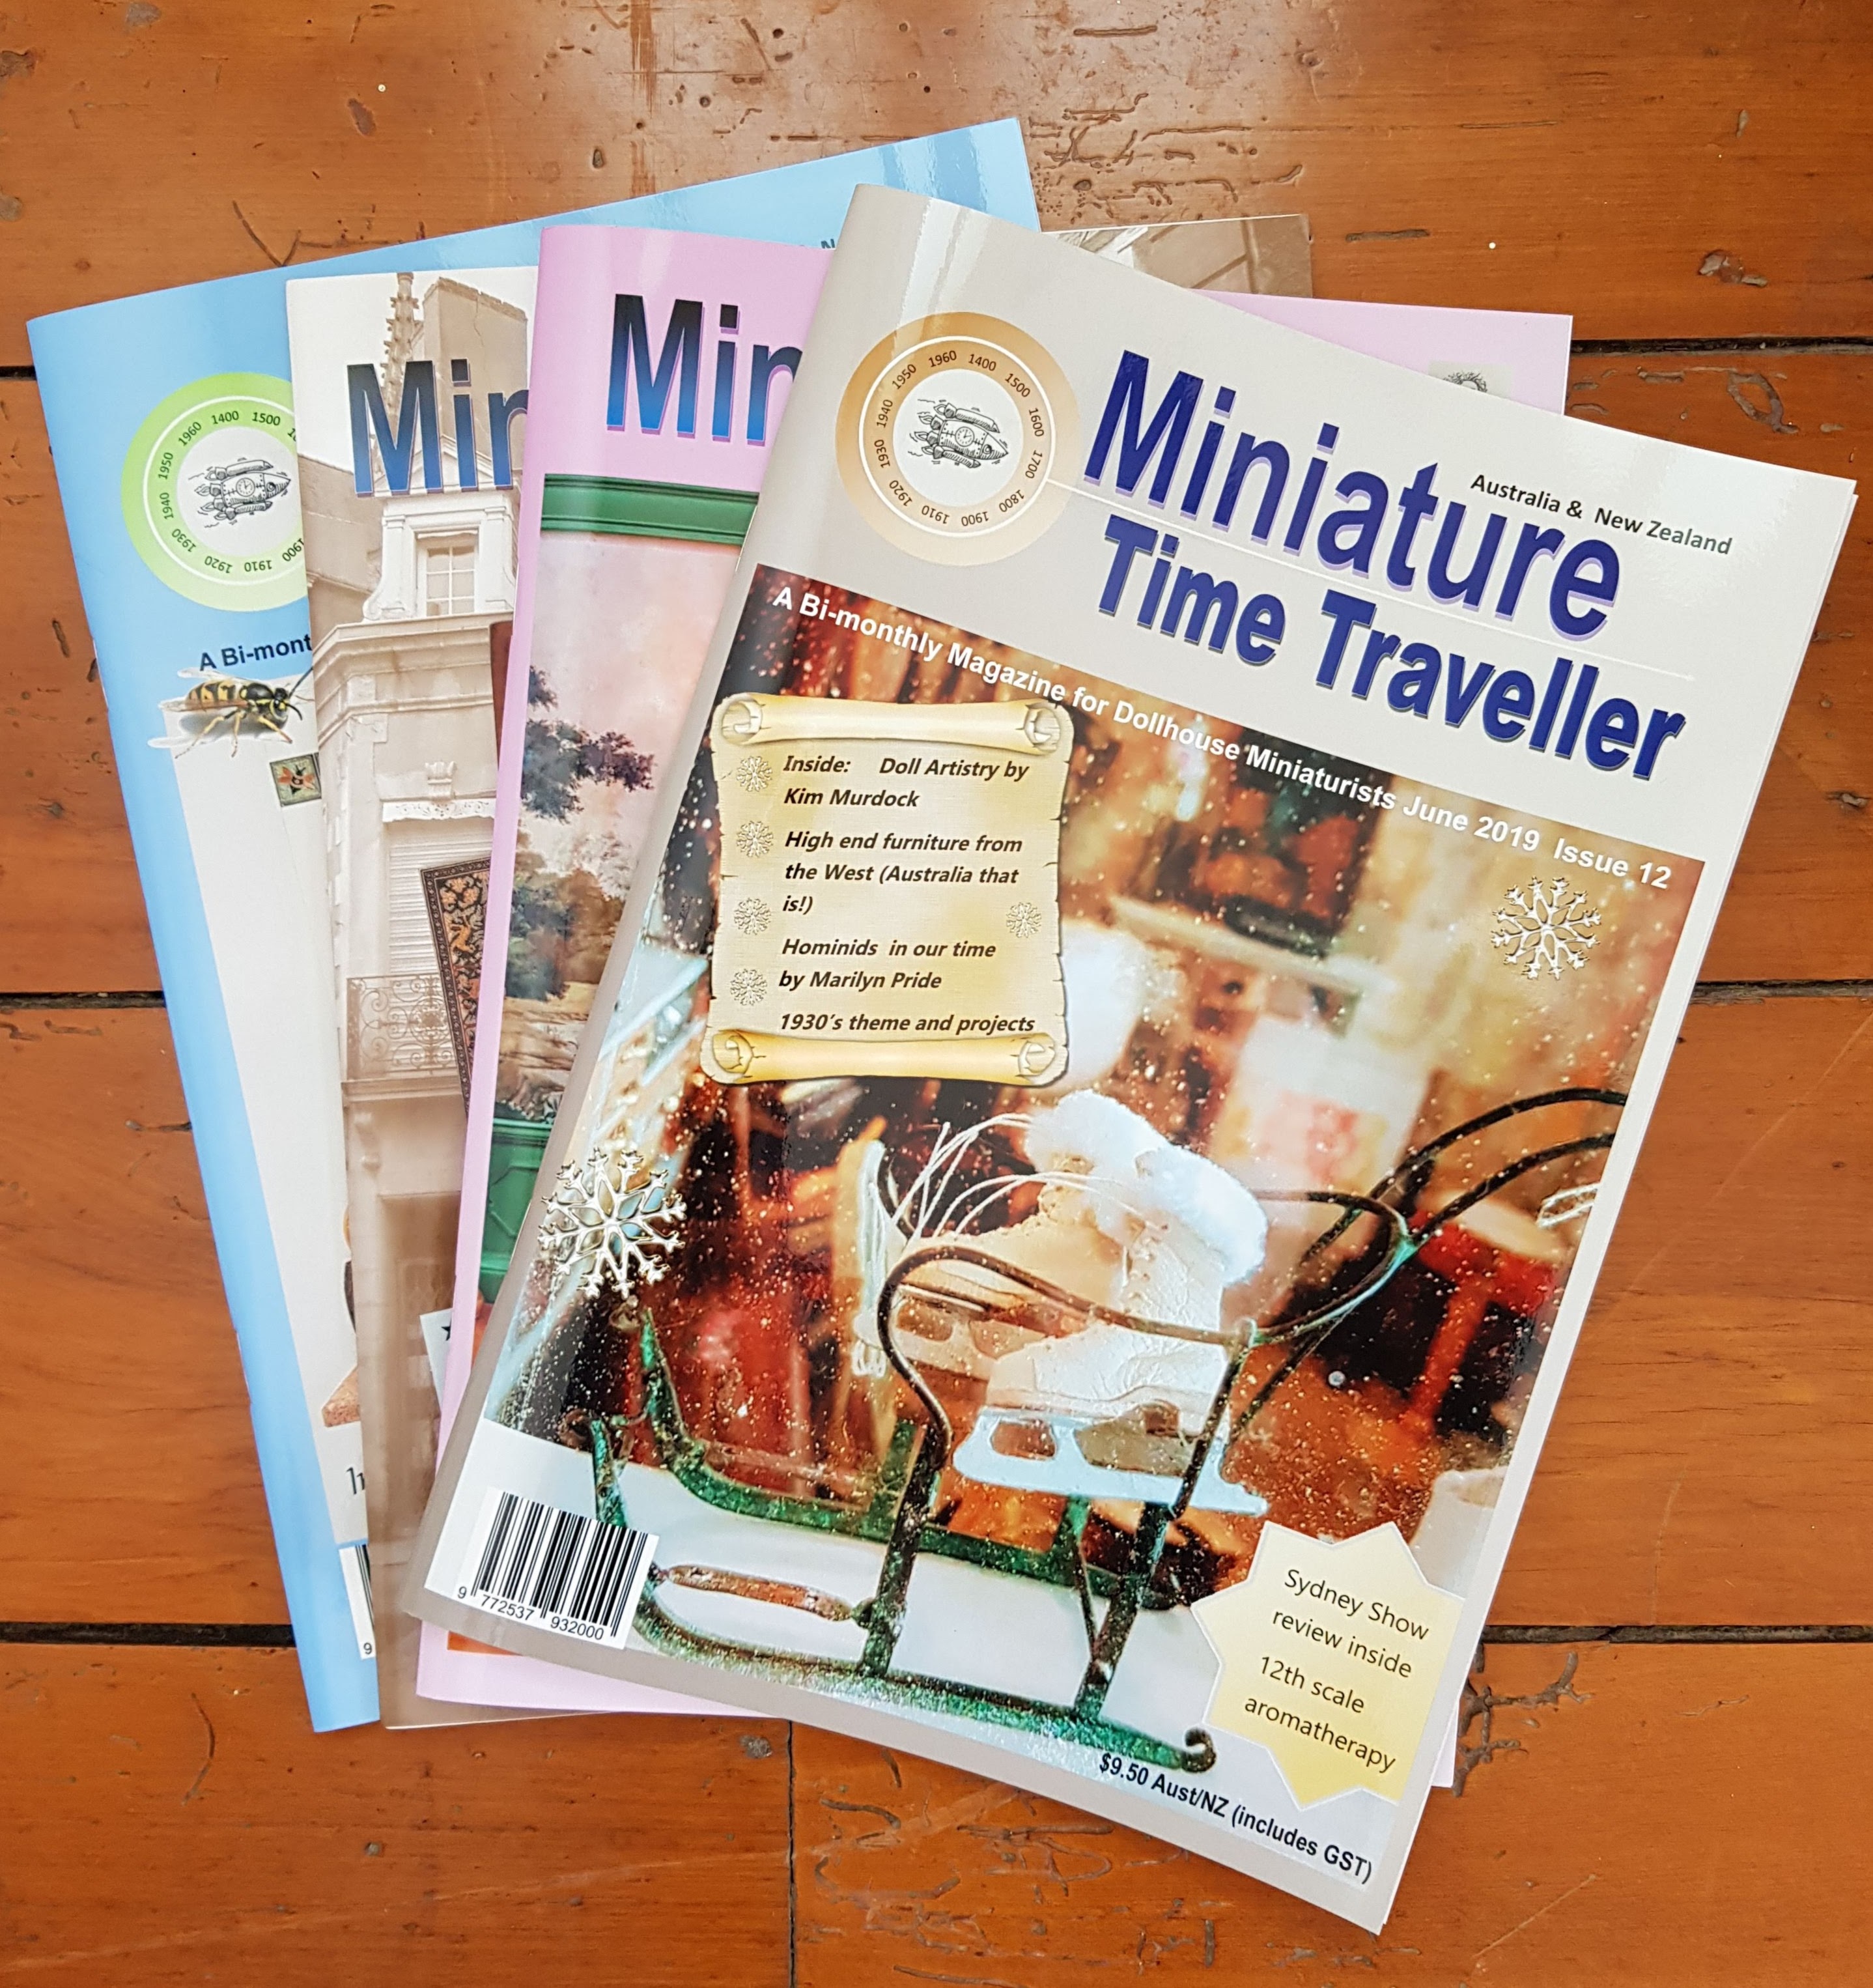 New Digital Release of My Knitting and Crochet Patterns Book - Miniature  Time Traveller